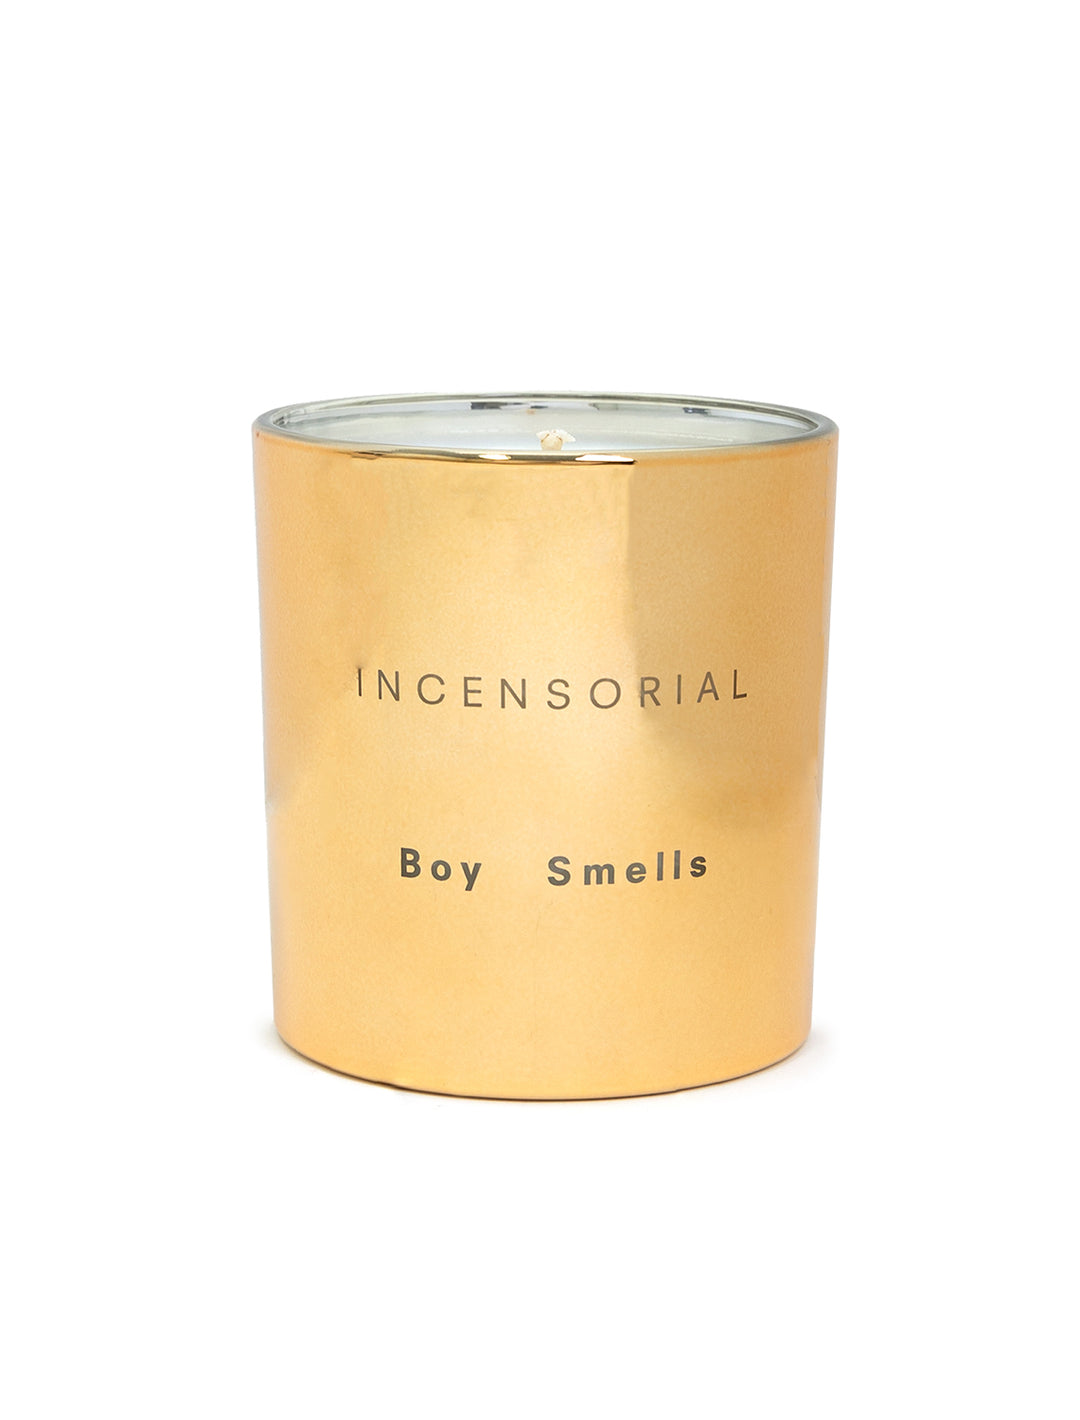 Front view of Boy Smells' incensorial candle.